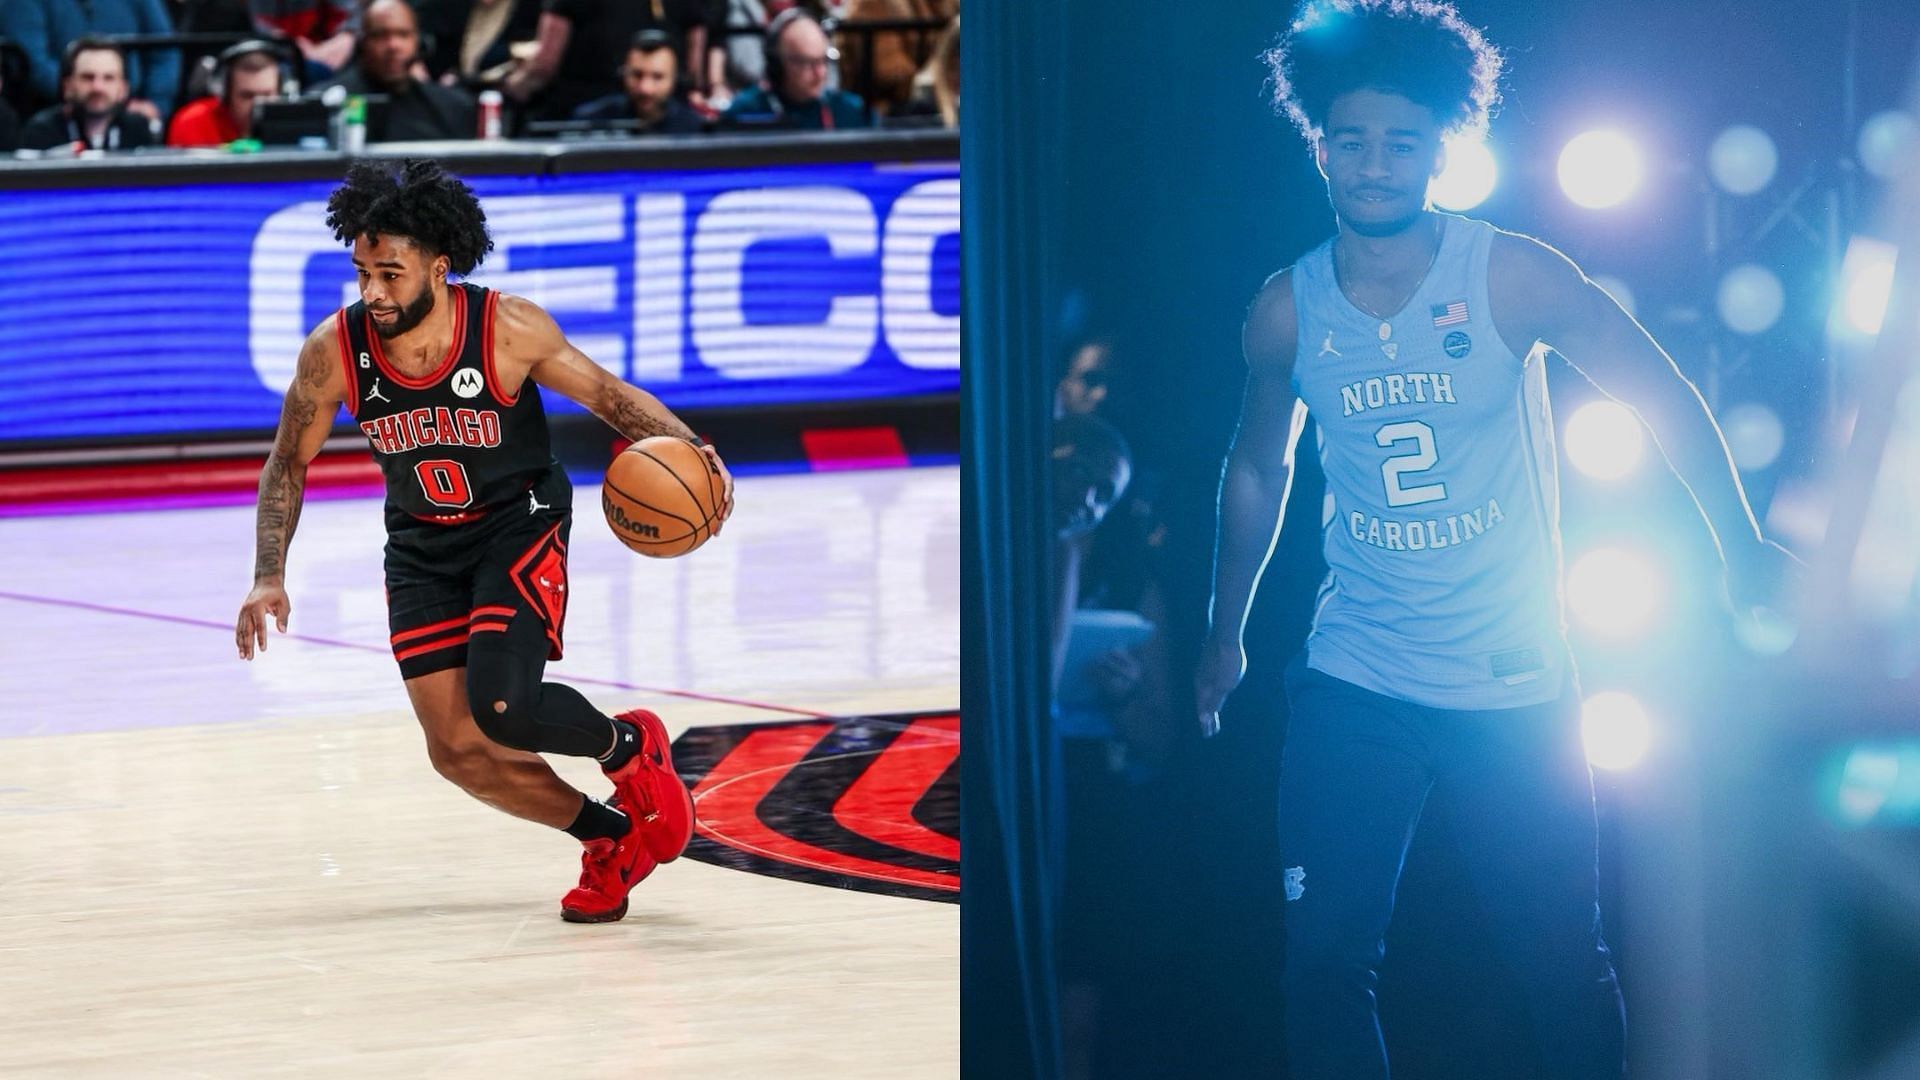 Coby White played college basketball at North Carolina